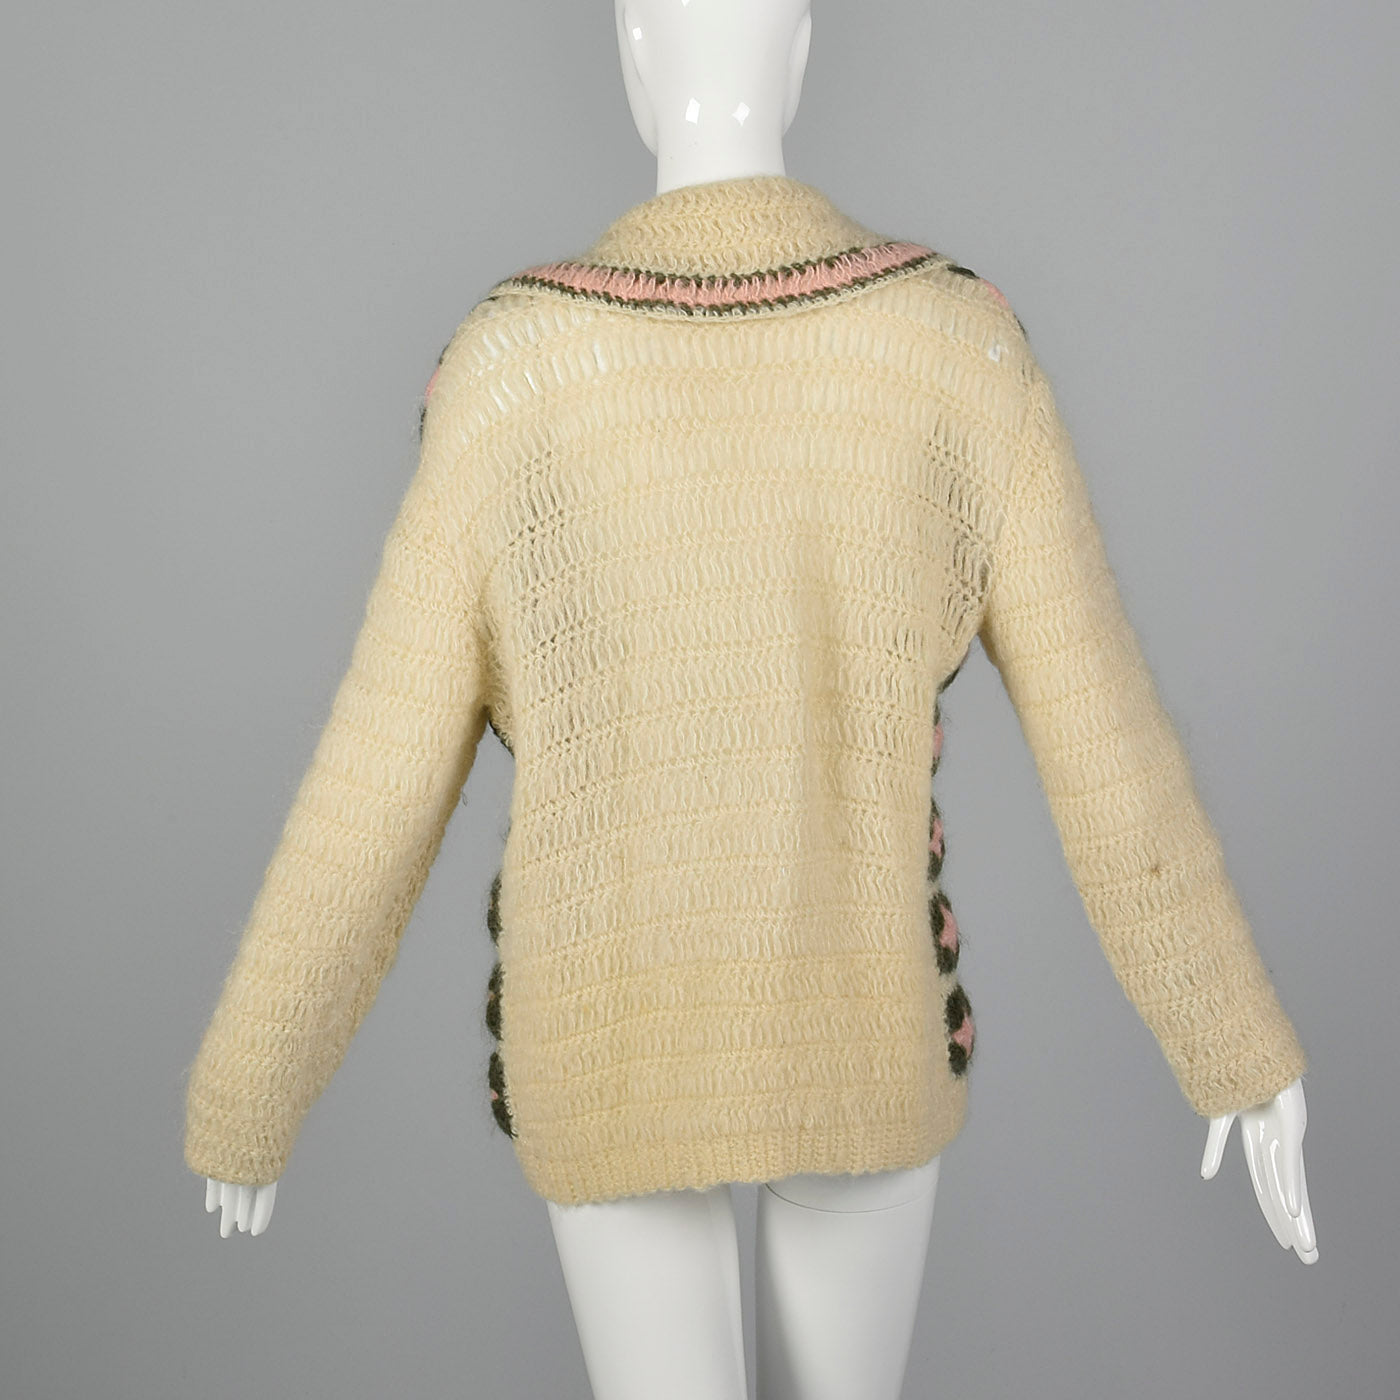 Large Schiaparelli 1950s Cream Cardigan Sweater with Pink and Green Granny Squares